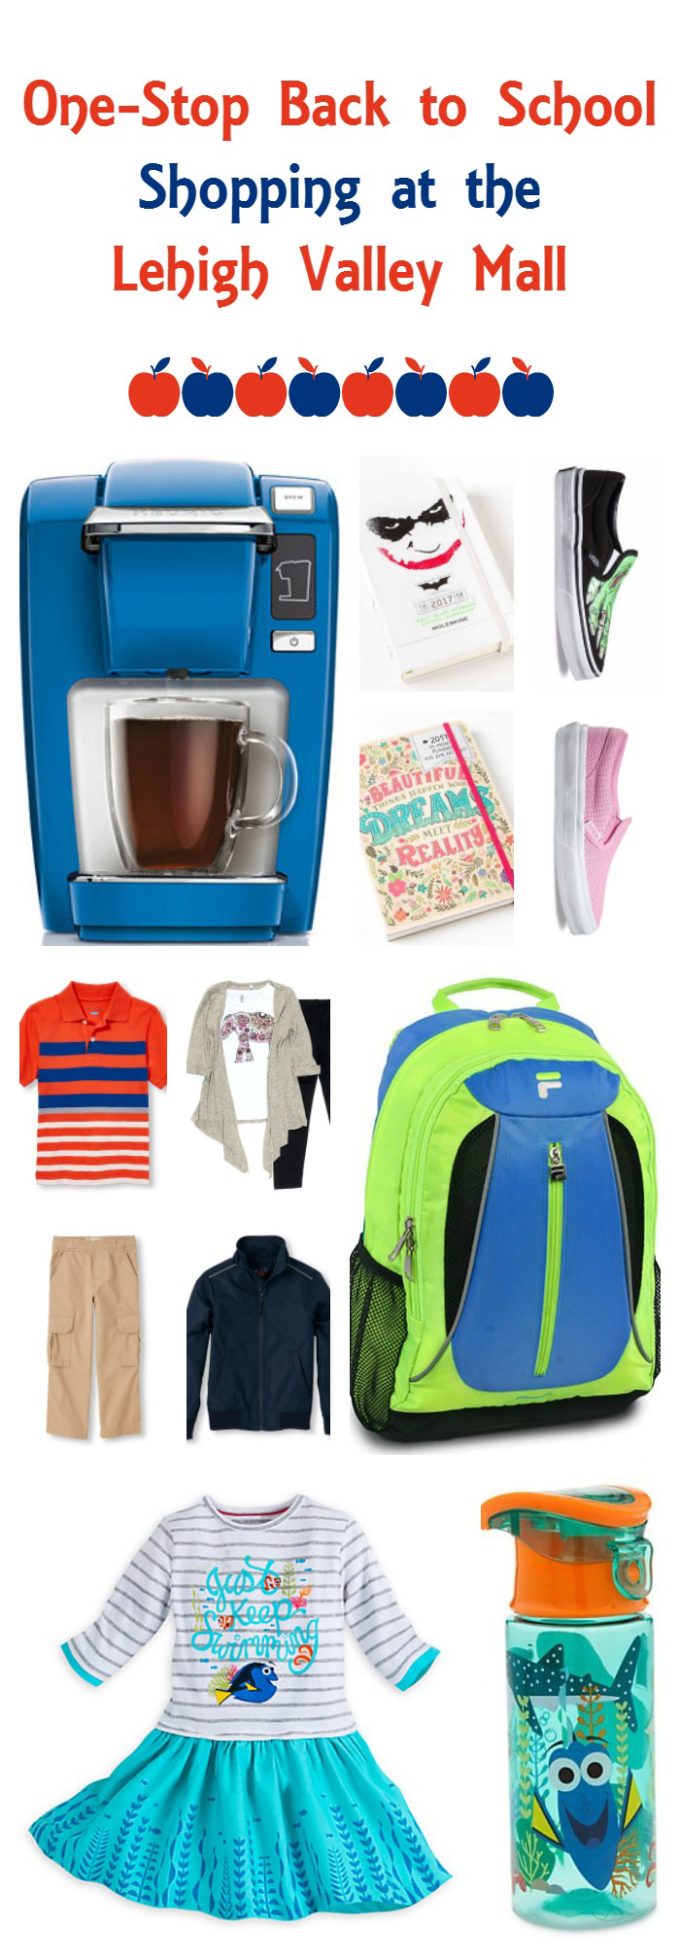 One-Stop Back to School Shopping at Lehigh Valley Mall #BacktoSimon